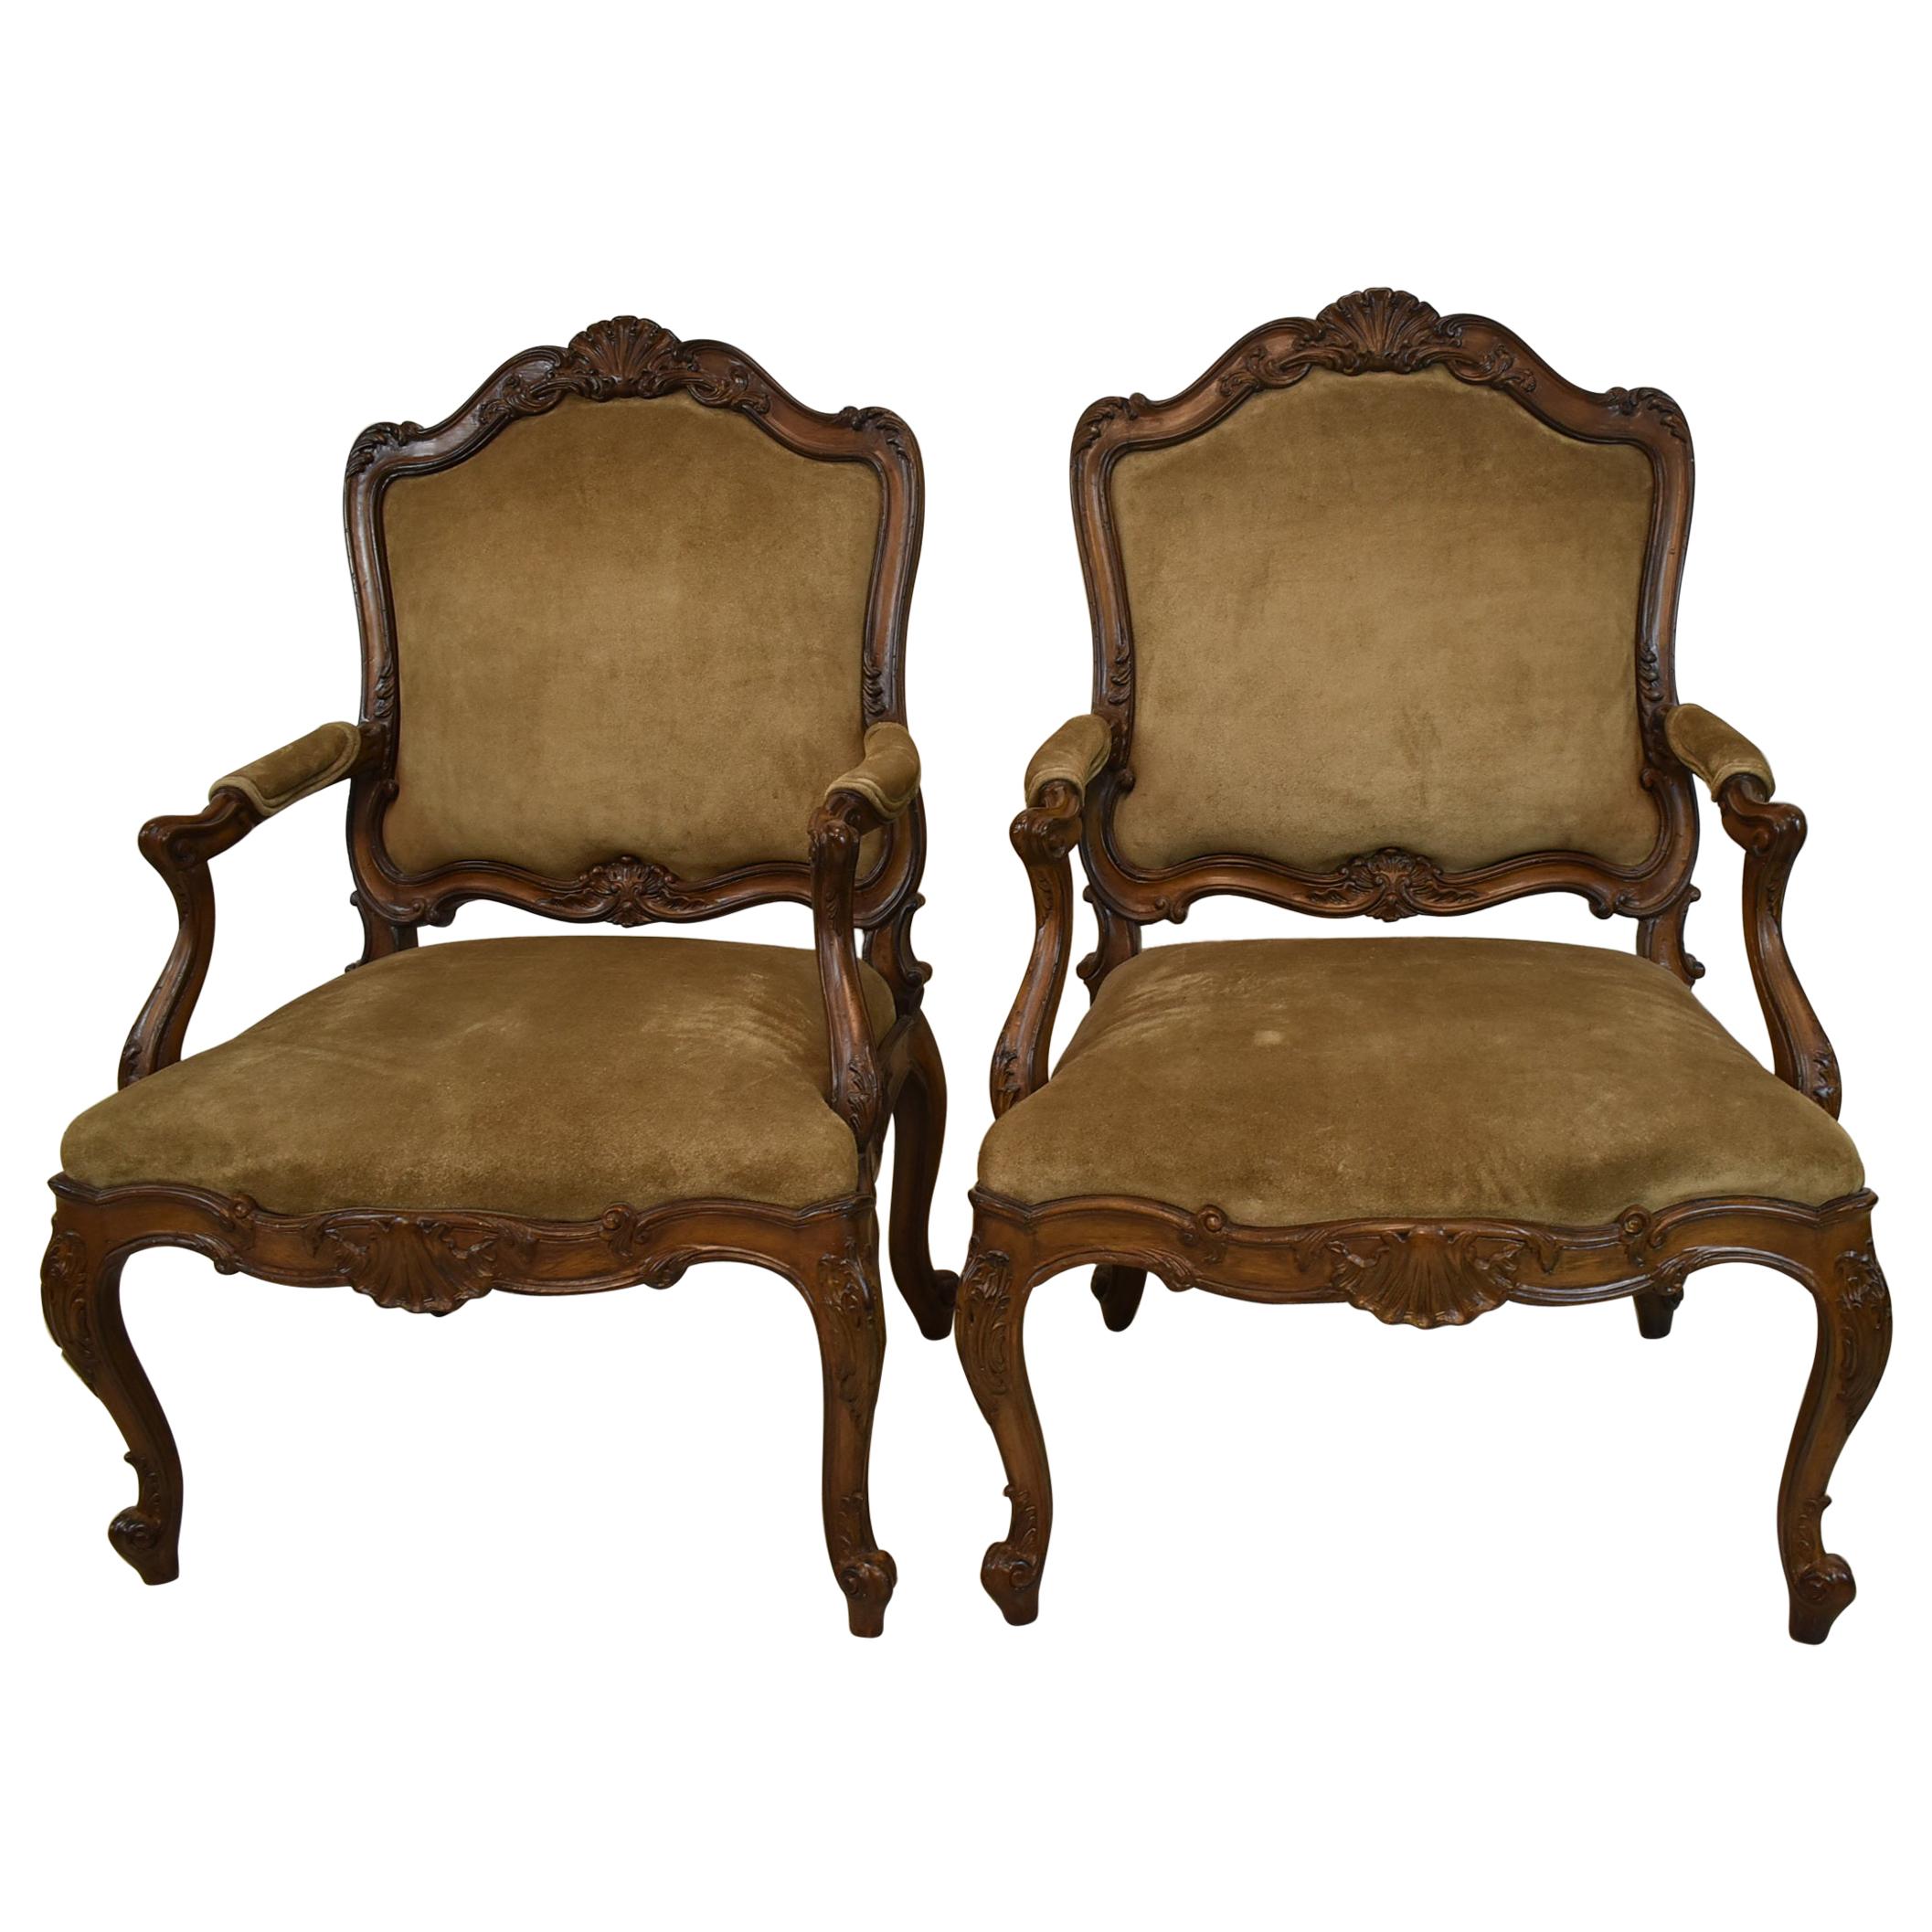 Pair of French Carved Wood Armchair Suede Upholstery